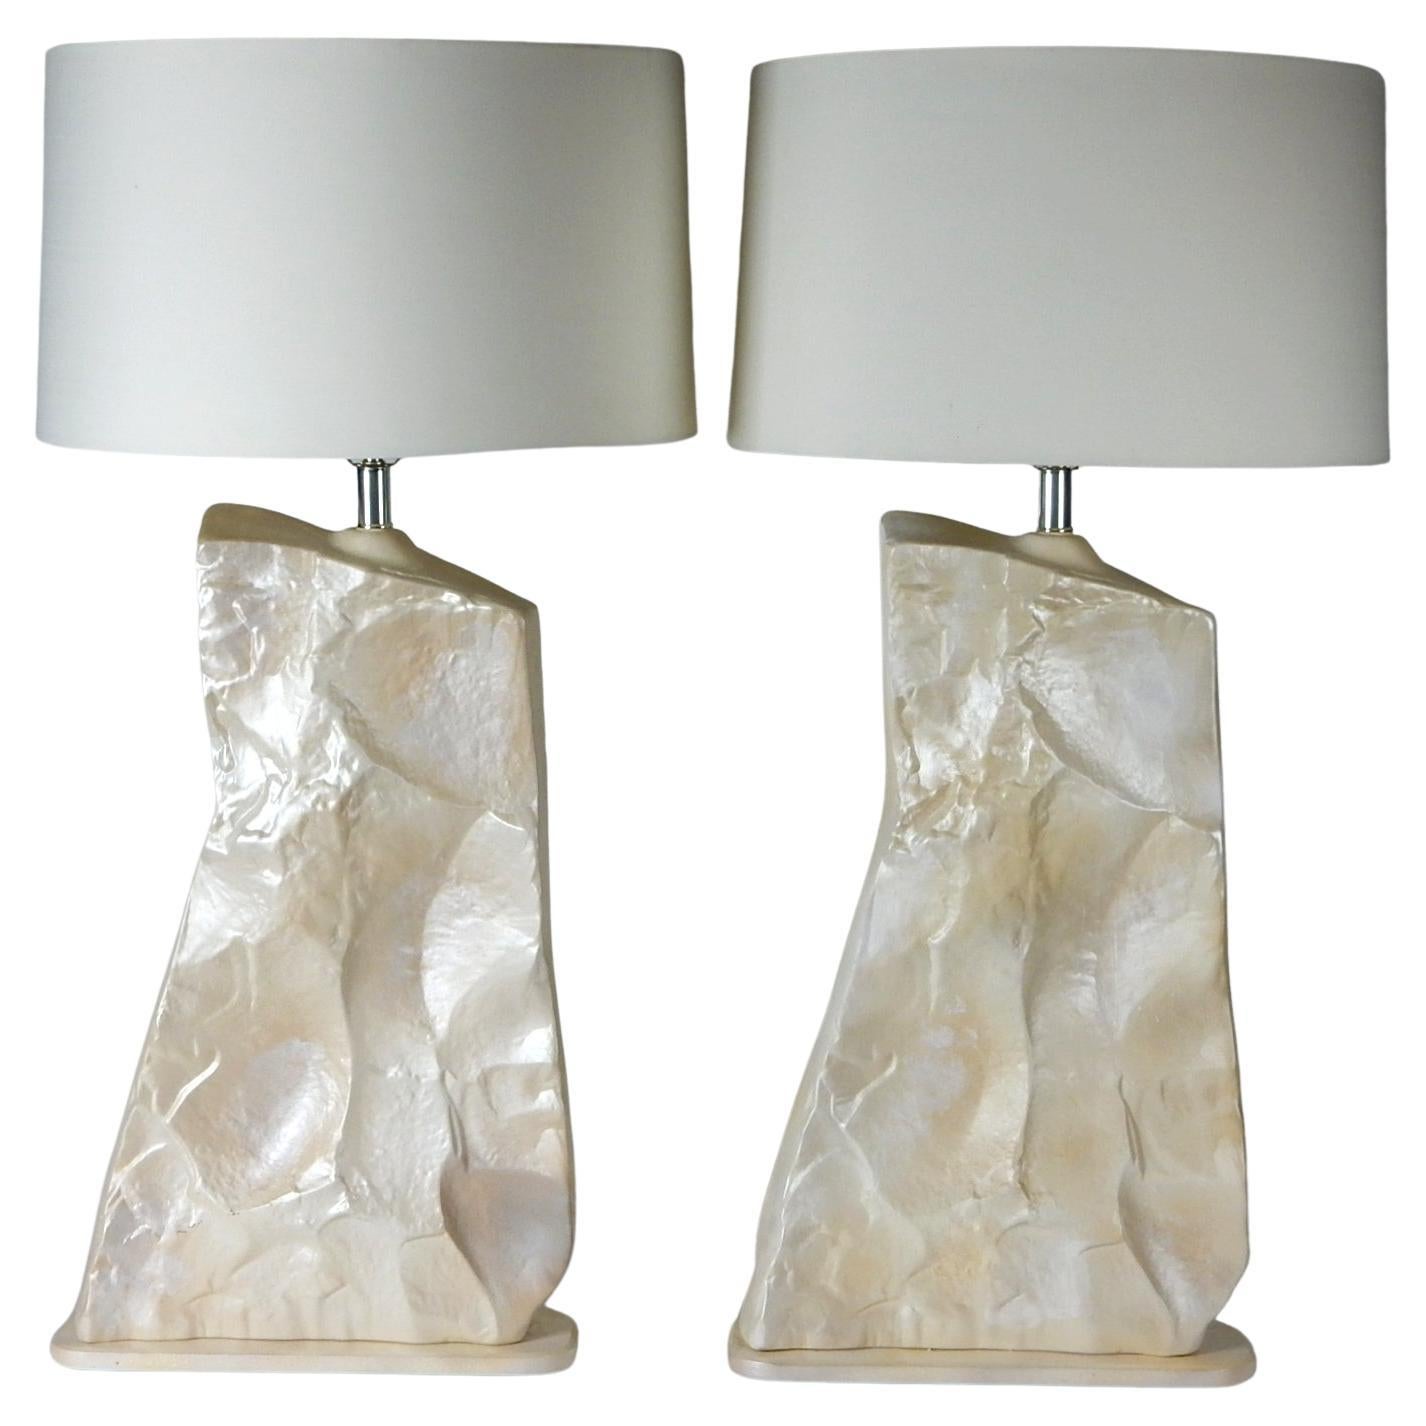 Very large realistic faux slate stone table lamps.
Made of a ceramic plaster material covered in pearl enamel.
Footed bases are wood, painted same color. Chrome plated hardware. Circa 1970's.
Possible European design with import markings on